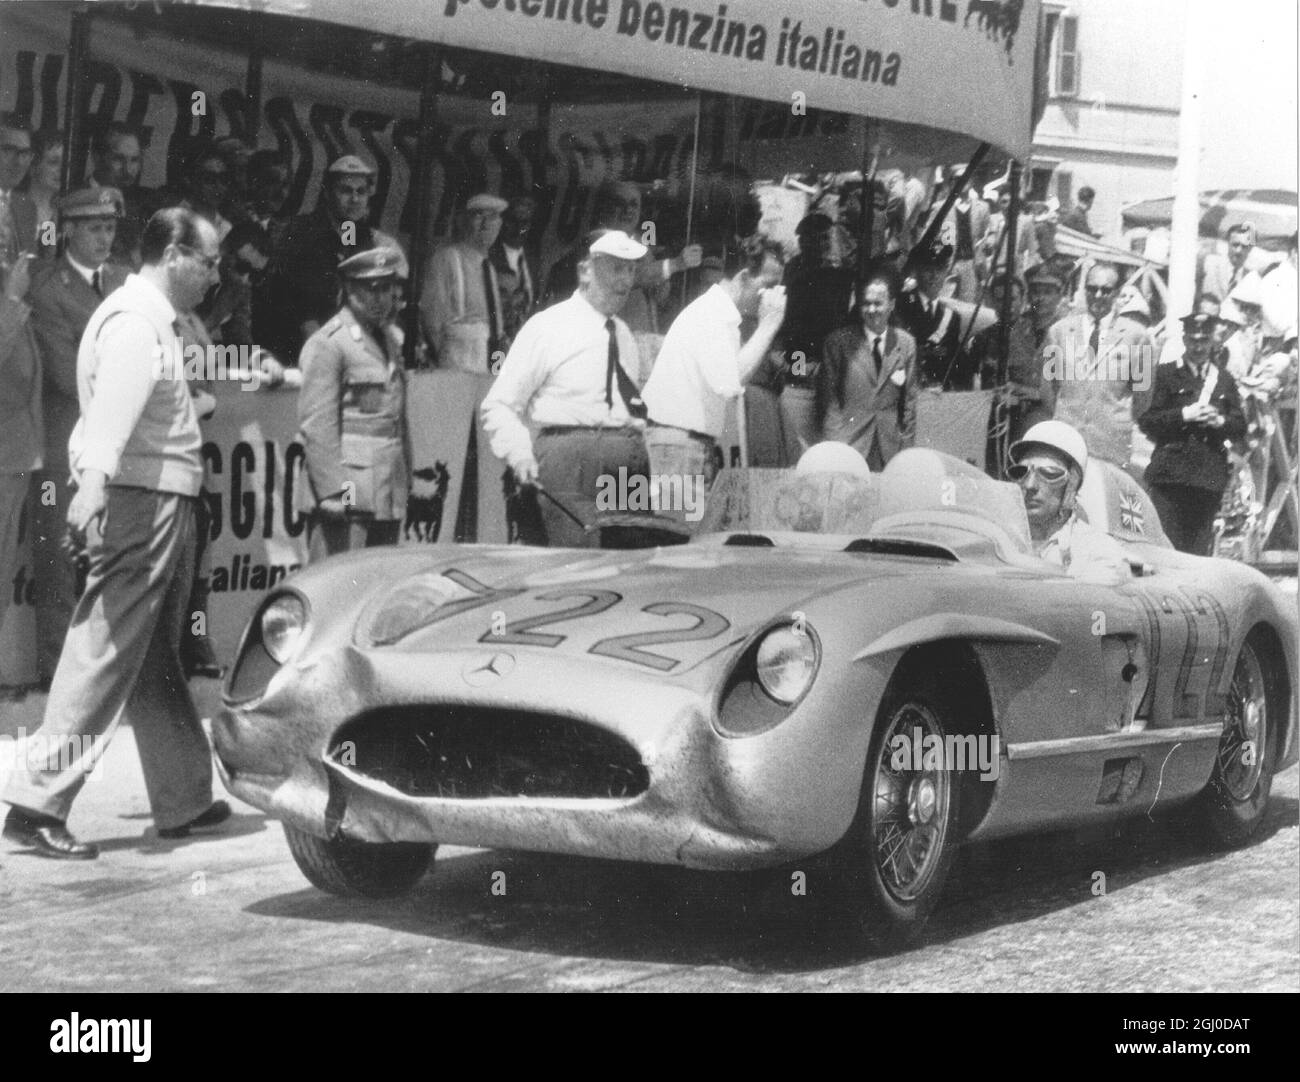 25 year old Stirling Moss of Great Britain yesterday became the first Englishman to win the 1,000 mile road race, Mille Miglia. The motor race was over the mountains and plains of Northern Italy and was won in the record time of 10 hours 7 minutes 48 seconds. Moss drove the new three litre German Mercedes and averaged over 124 mph along the fifty six mile stretch between Cremona and Mantura. At times he touched 200 mph May 2nd 1955 Stock Photo